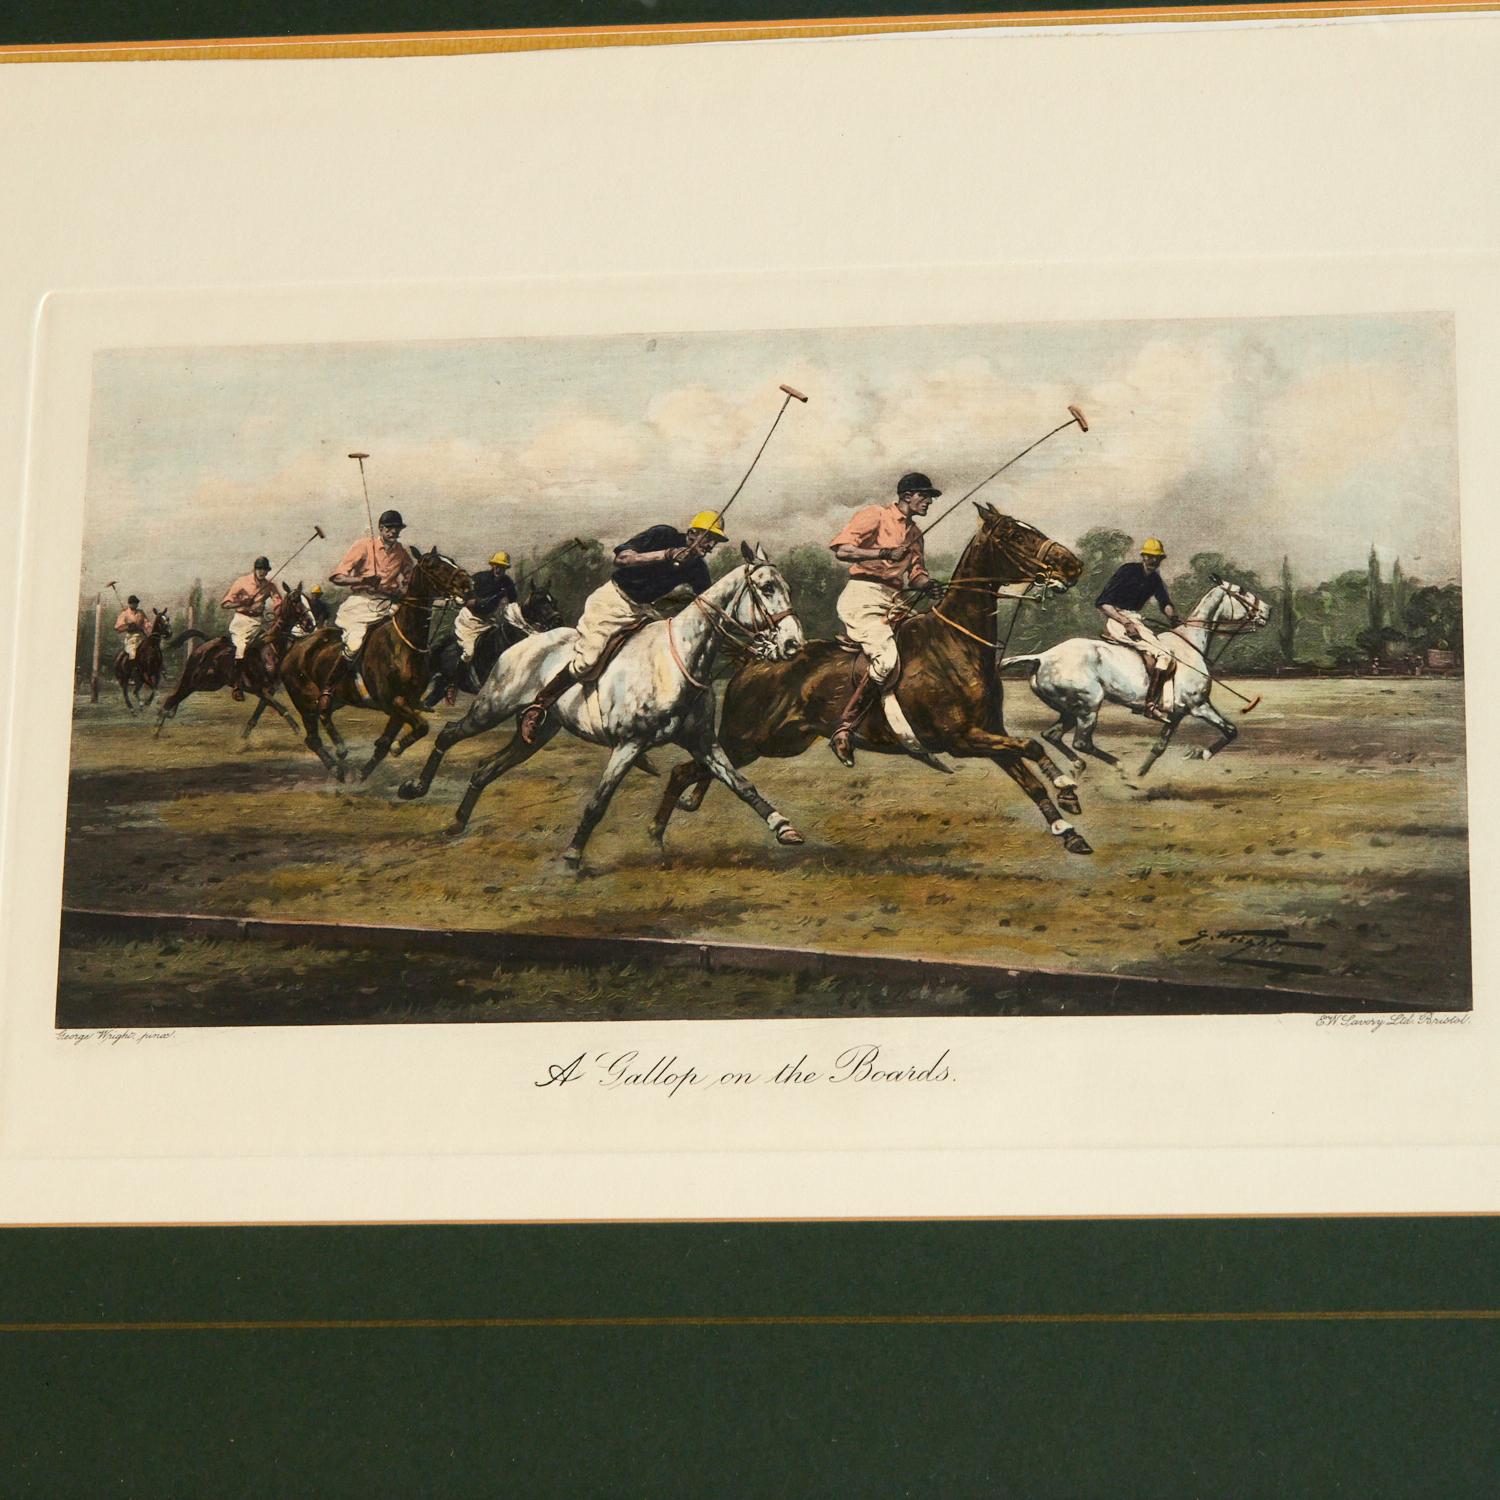 Sporting Art After George Wright Hand-Colored Polo Etchings E.W. Savory Ltd England Publisher